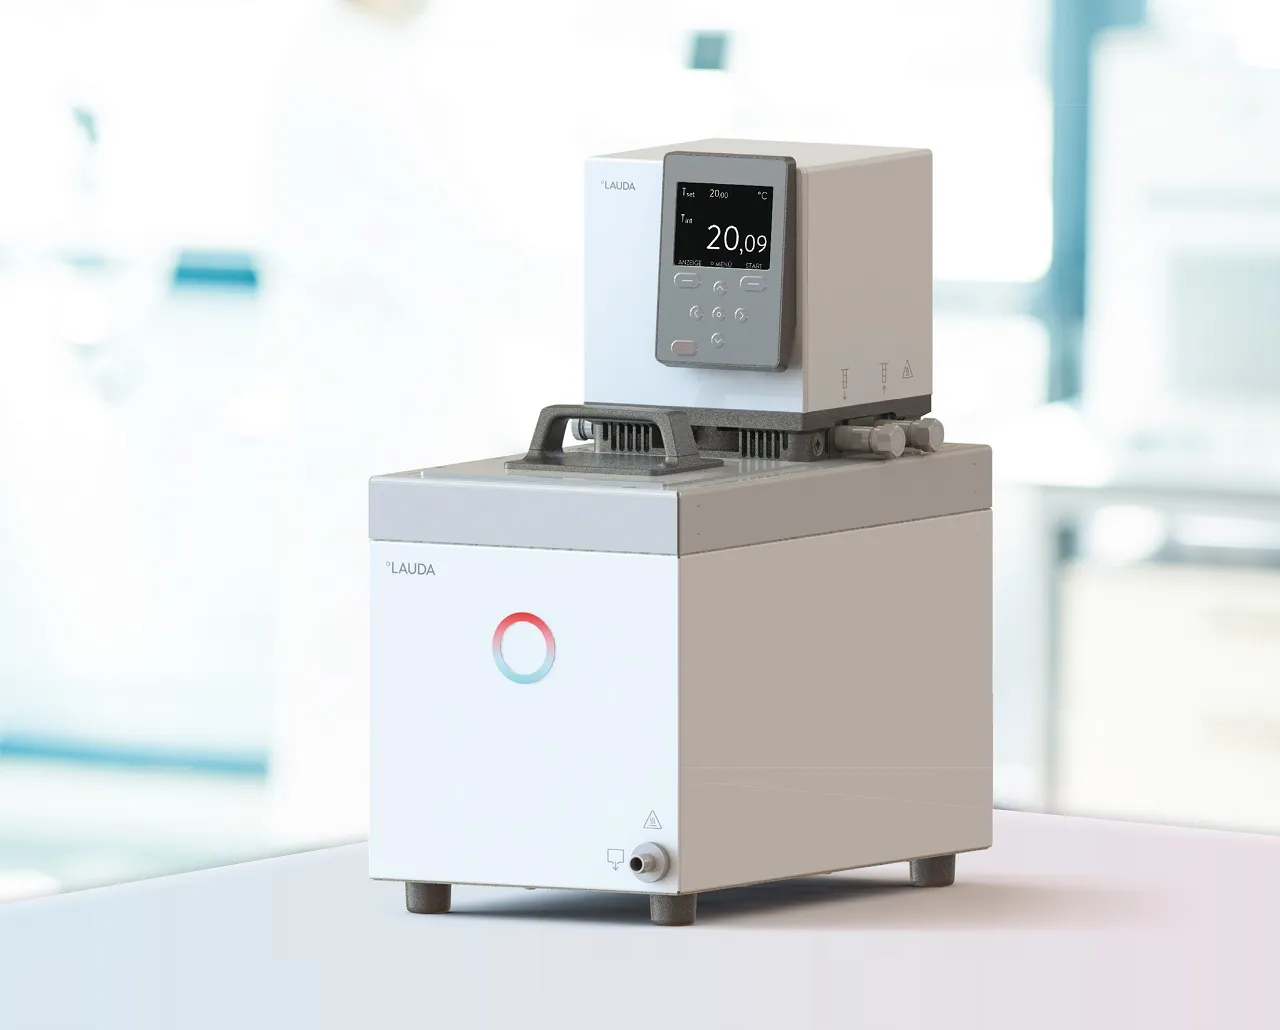 LAUDA presents new solutions for storing and one for transporting sensitive samples